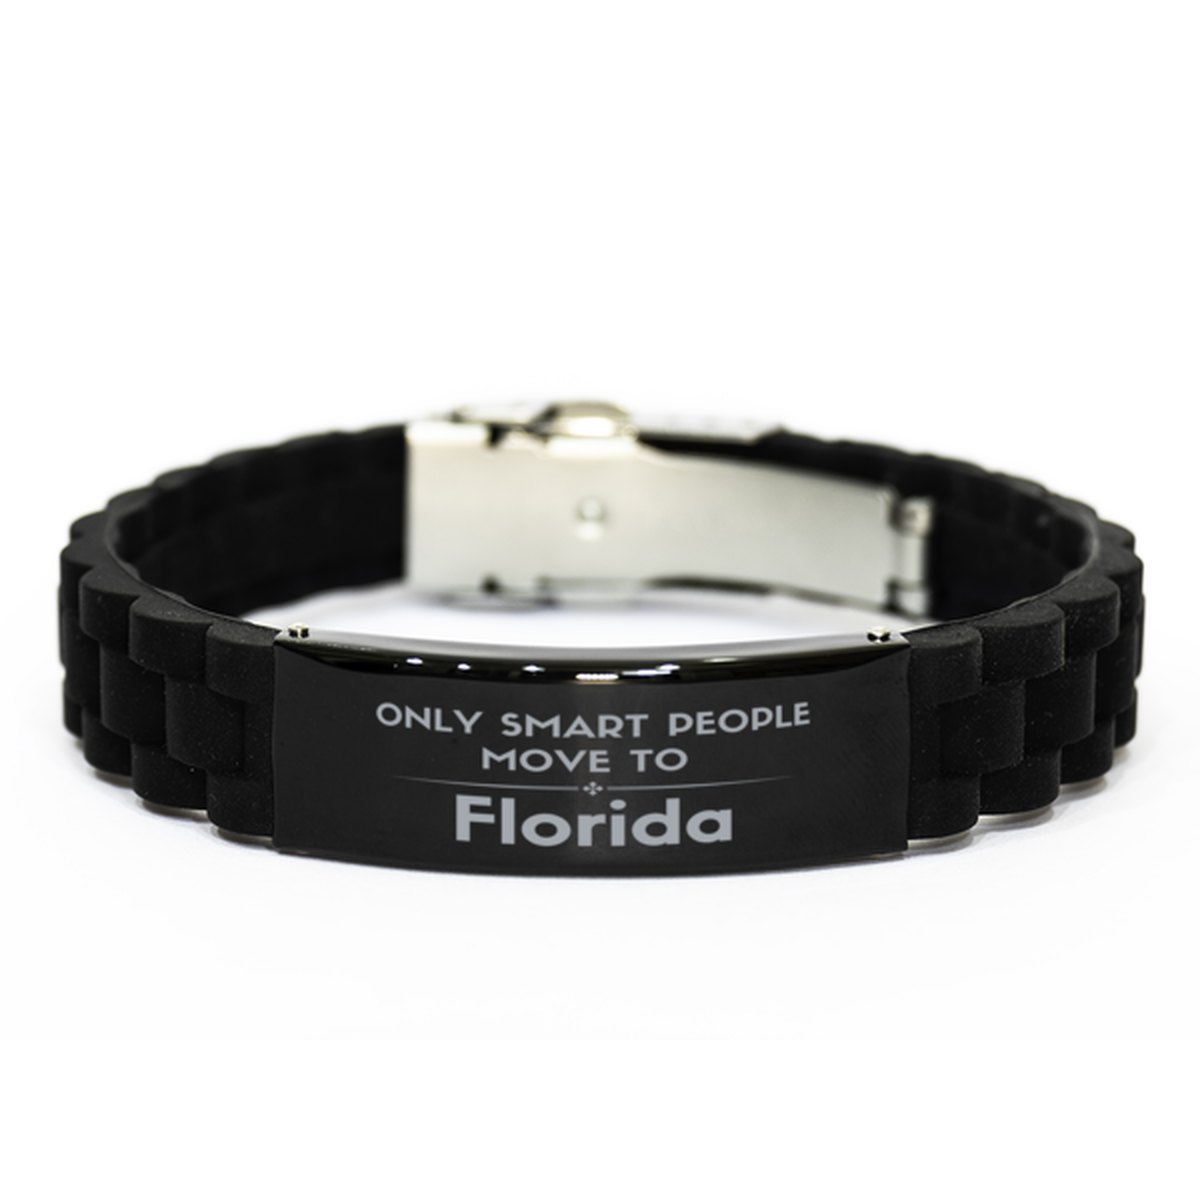 Only smart people move to Florida Black Glidelock Clasp Bracelet, Gag Gifts For Florida, Move to Florida Gifts for Friends Coworker Funny Saying Quote